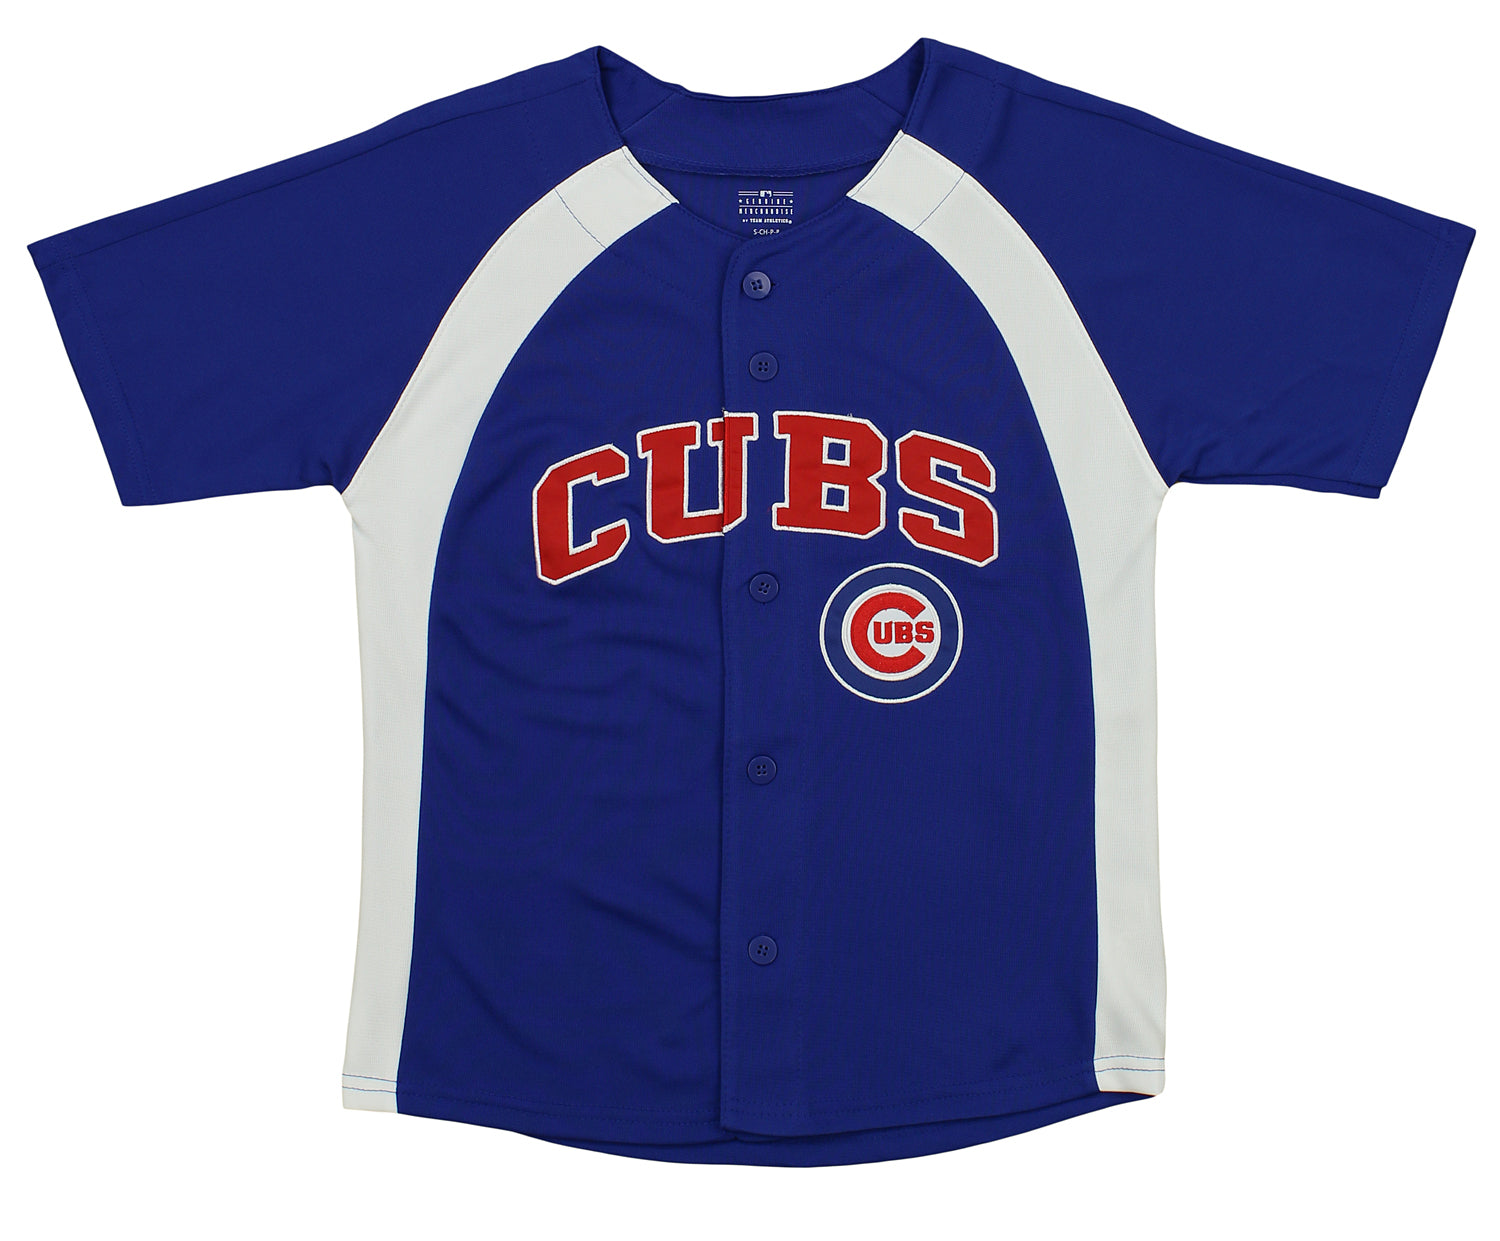 Outerstuff MLB Youth Boys Chicago Cubs Blank Baseball Jersey, Blue